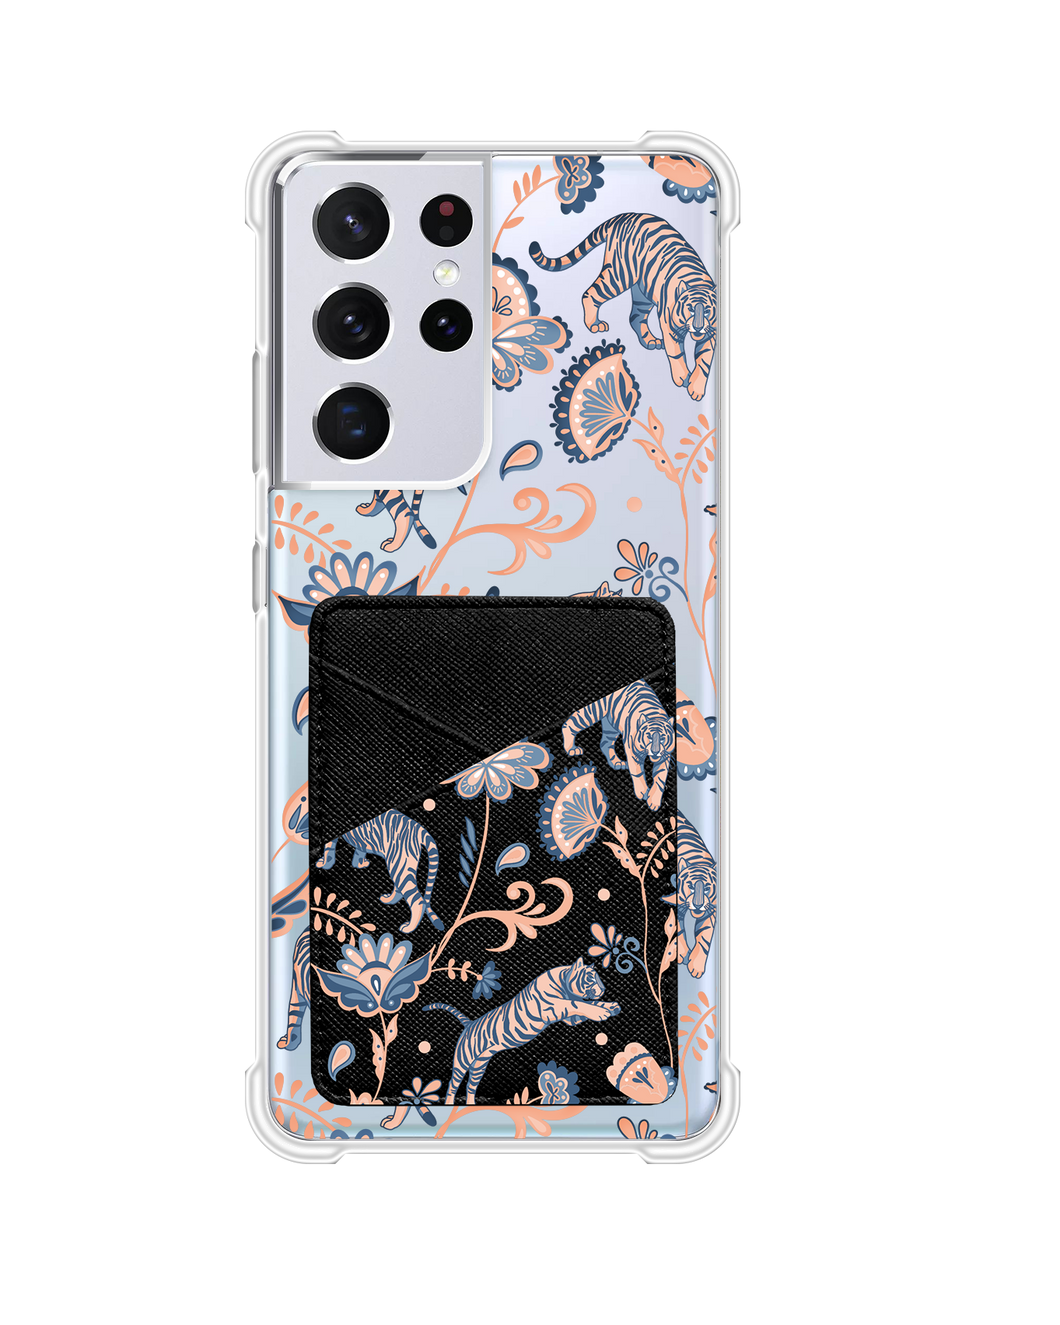 Android Phone Wallet Case - Tiger & Floral 5.0